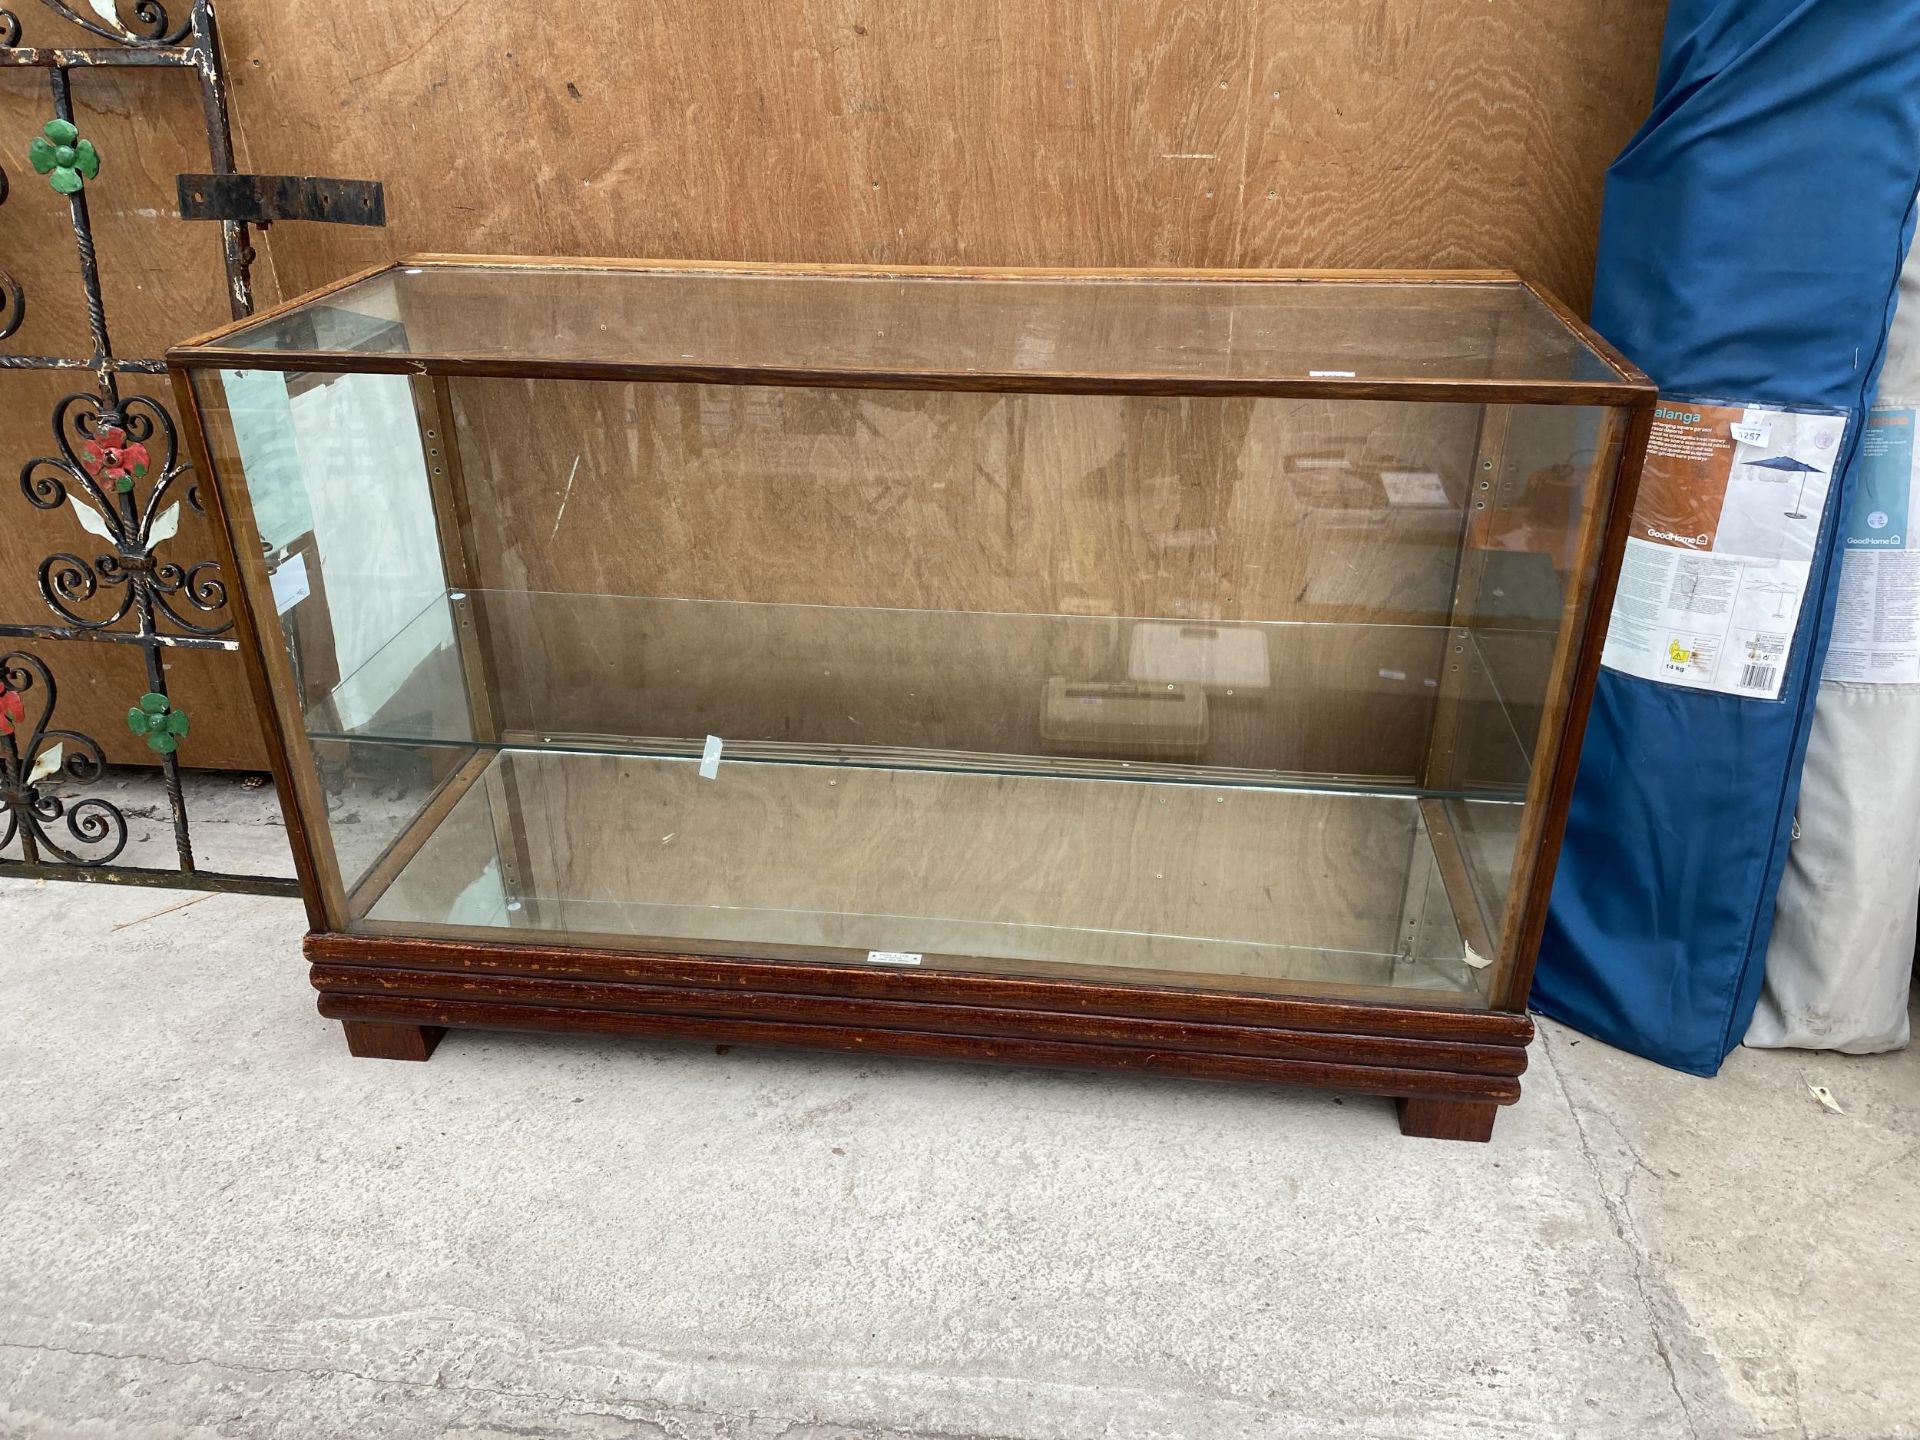 A VINTAGE WOODEN SHOP DISPLAY COUNTER WITH SINGLE GLASS SHELF